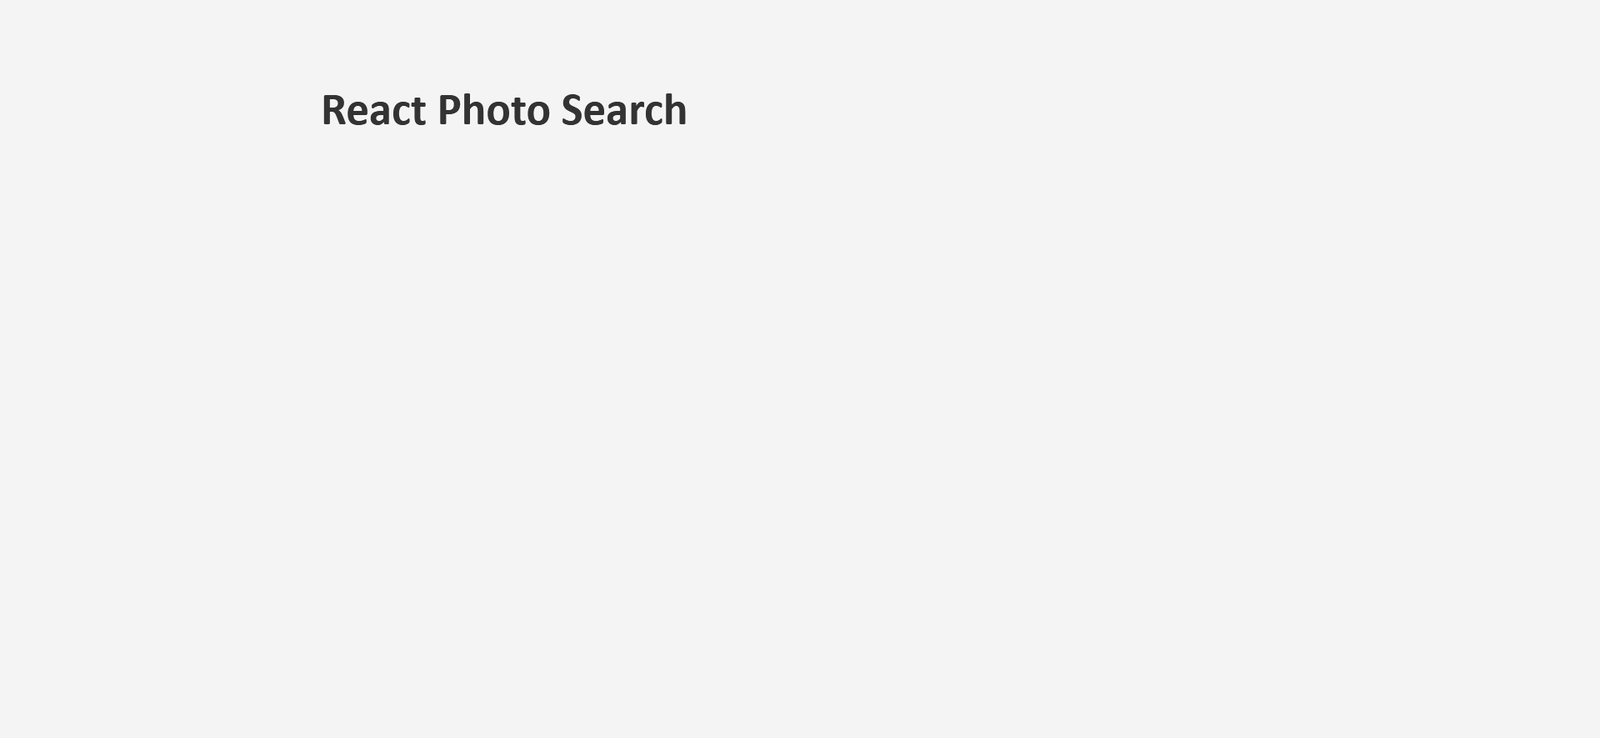 Application with "React Photo Search" Title